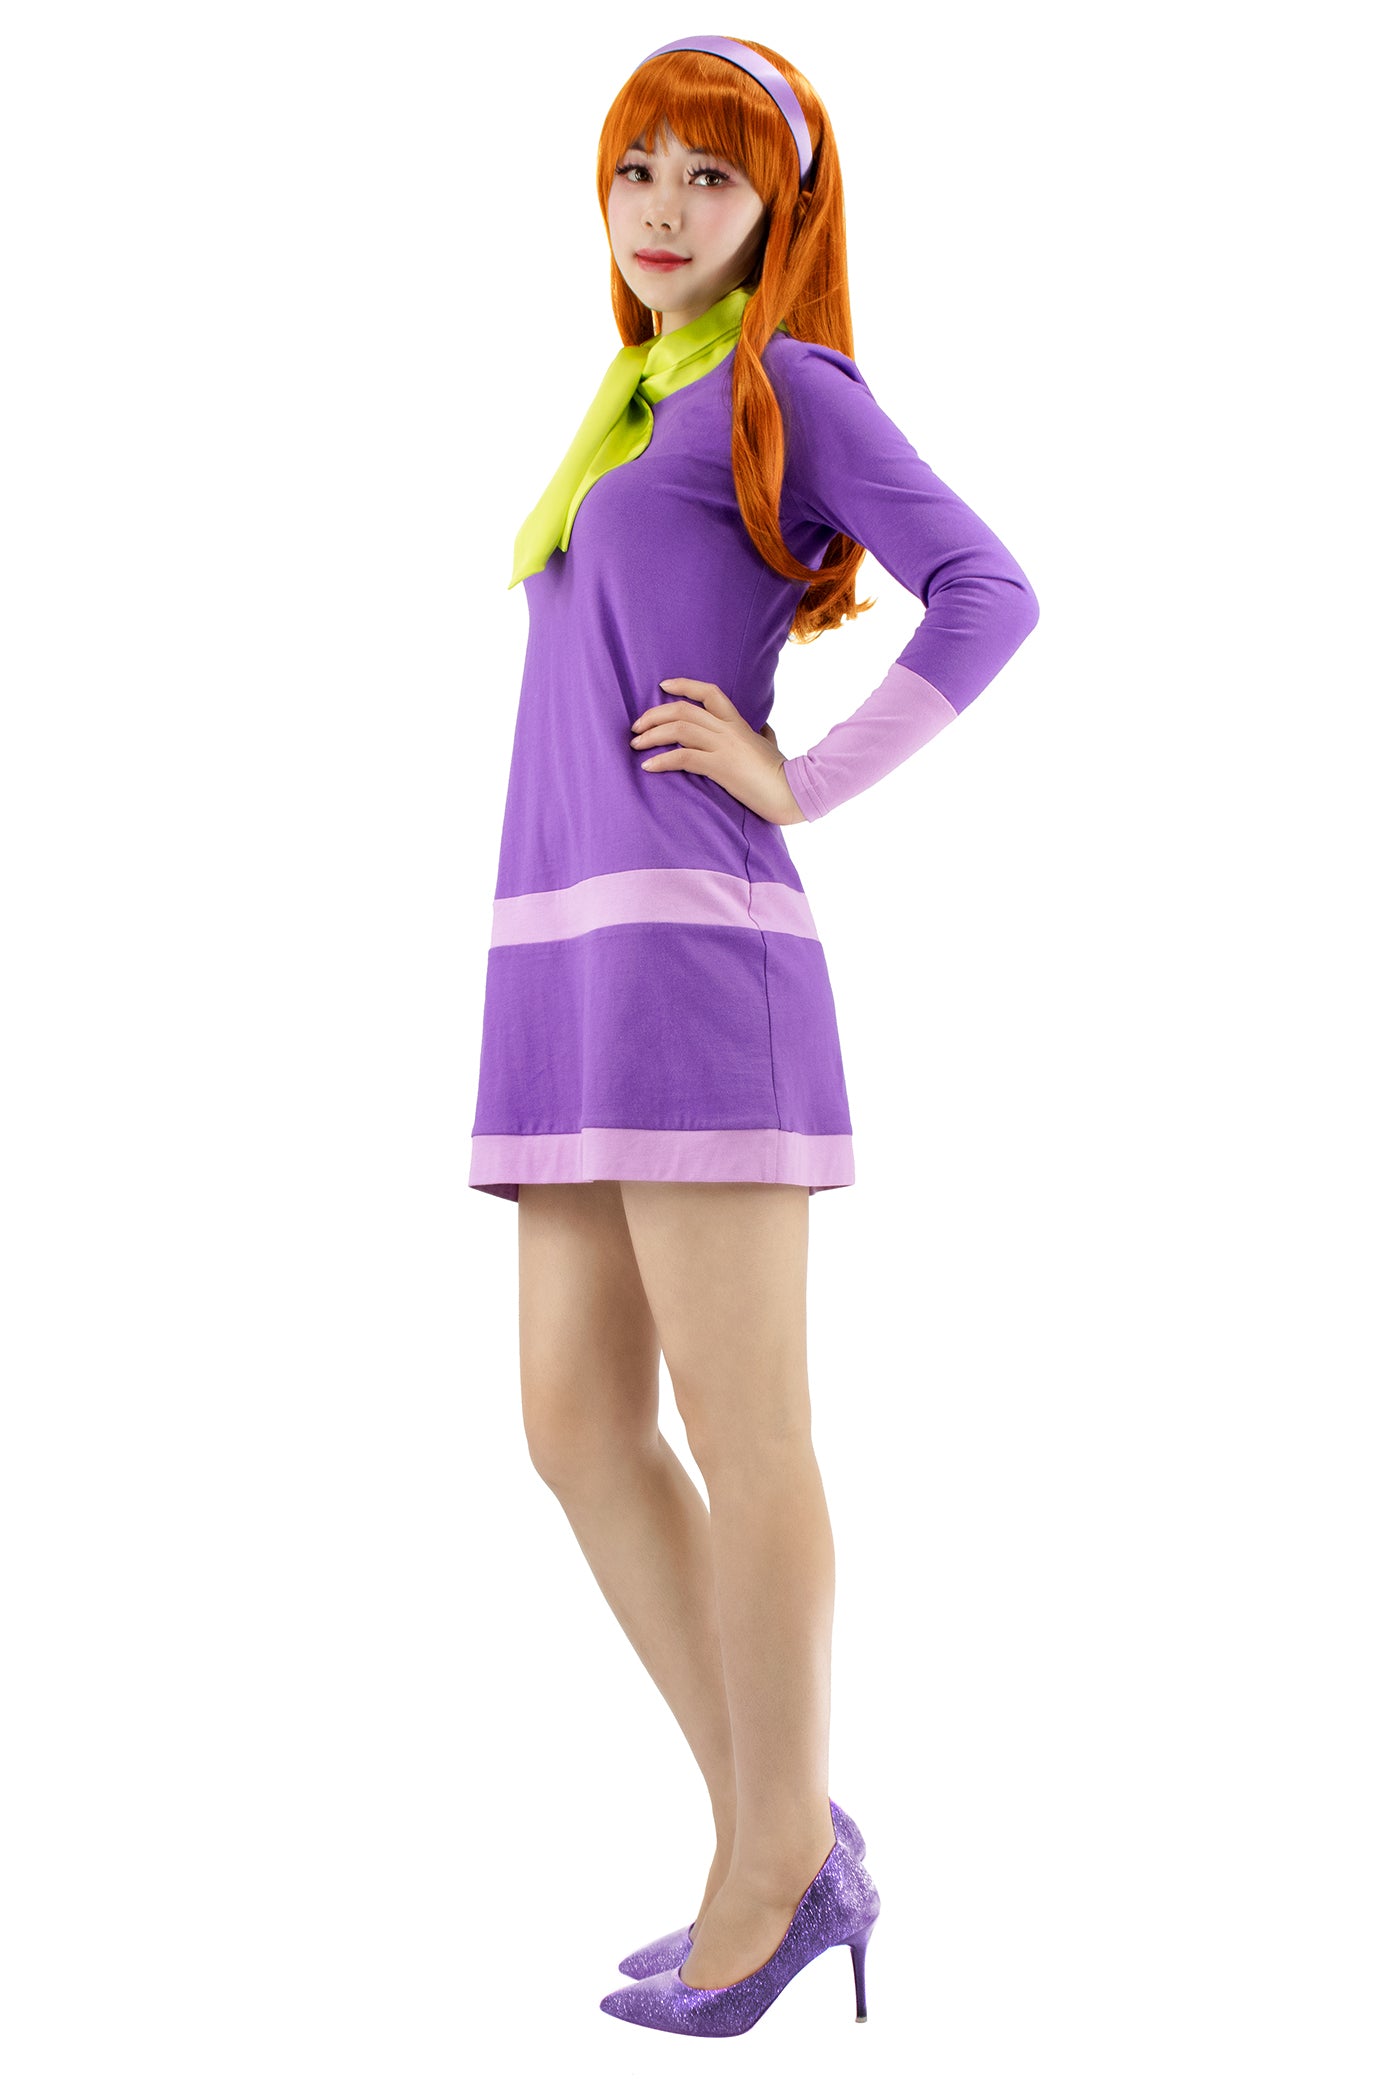 Womens Daphne Cosplay Costume Outfit with Scarf Headband